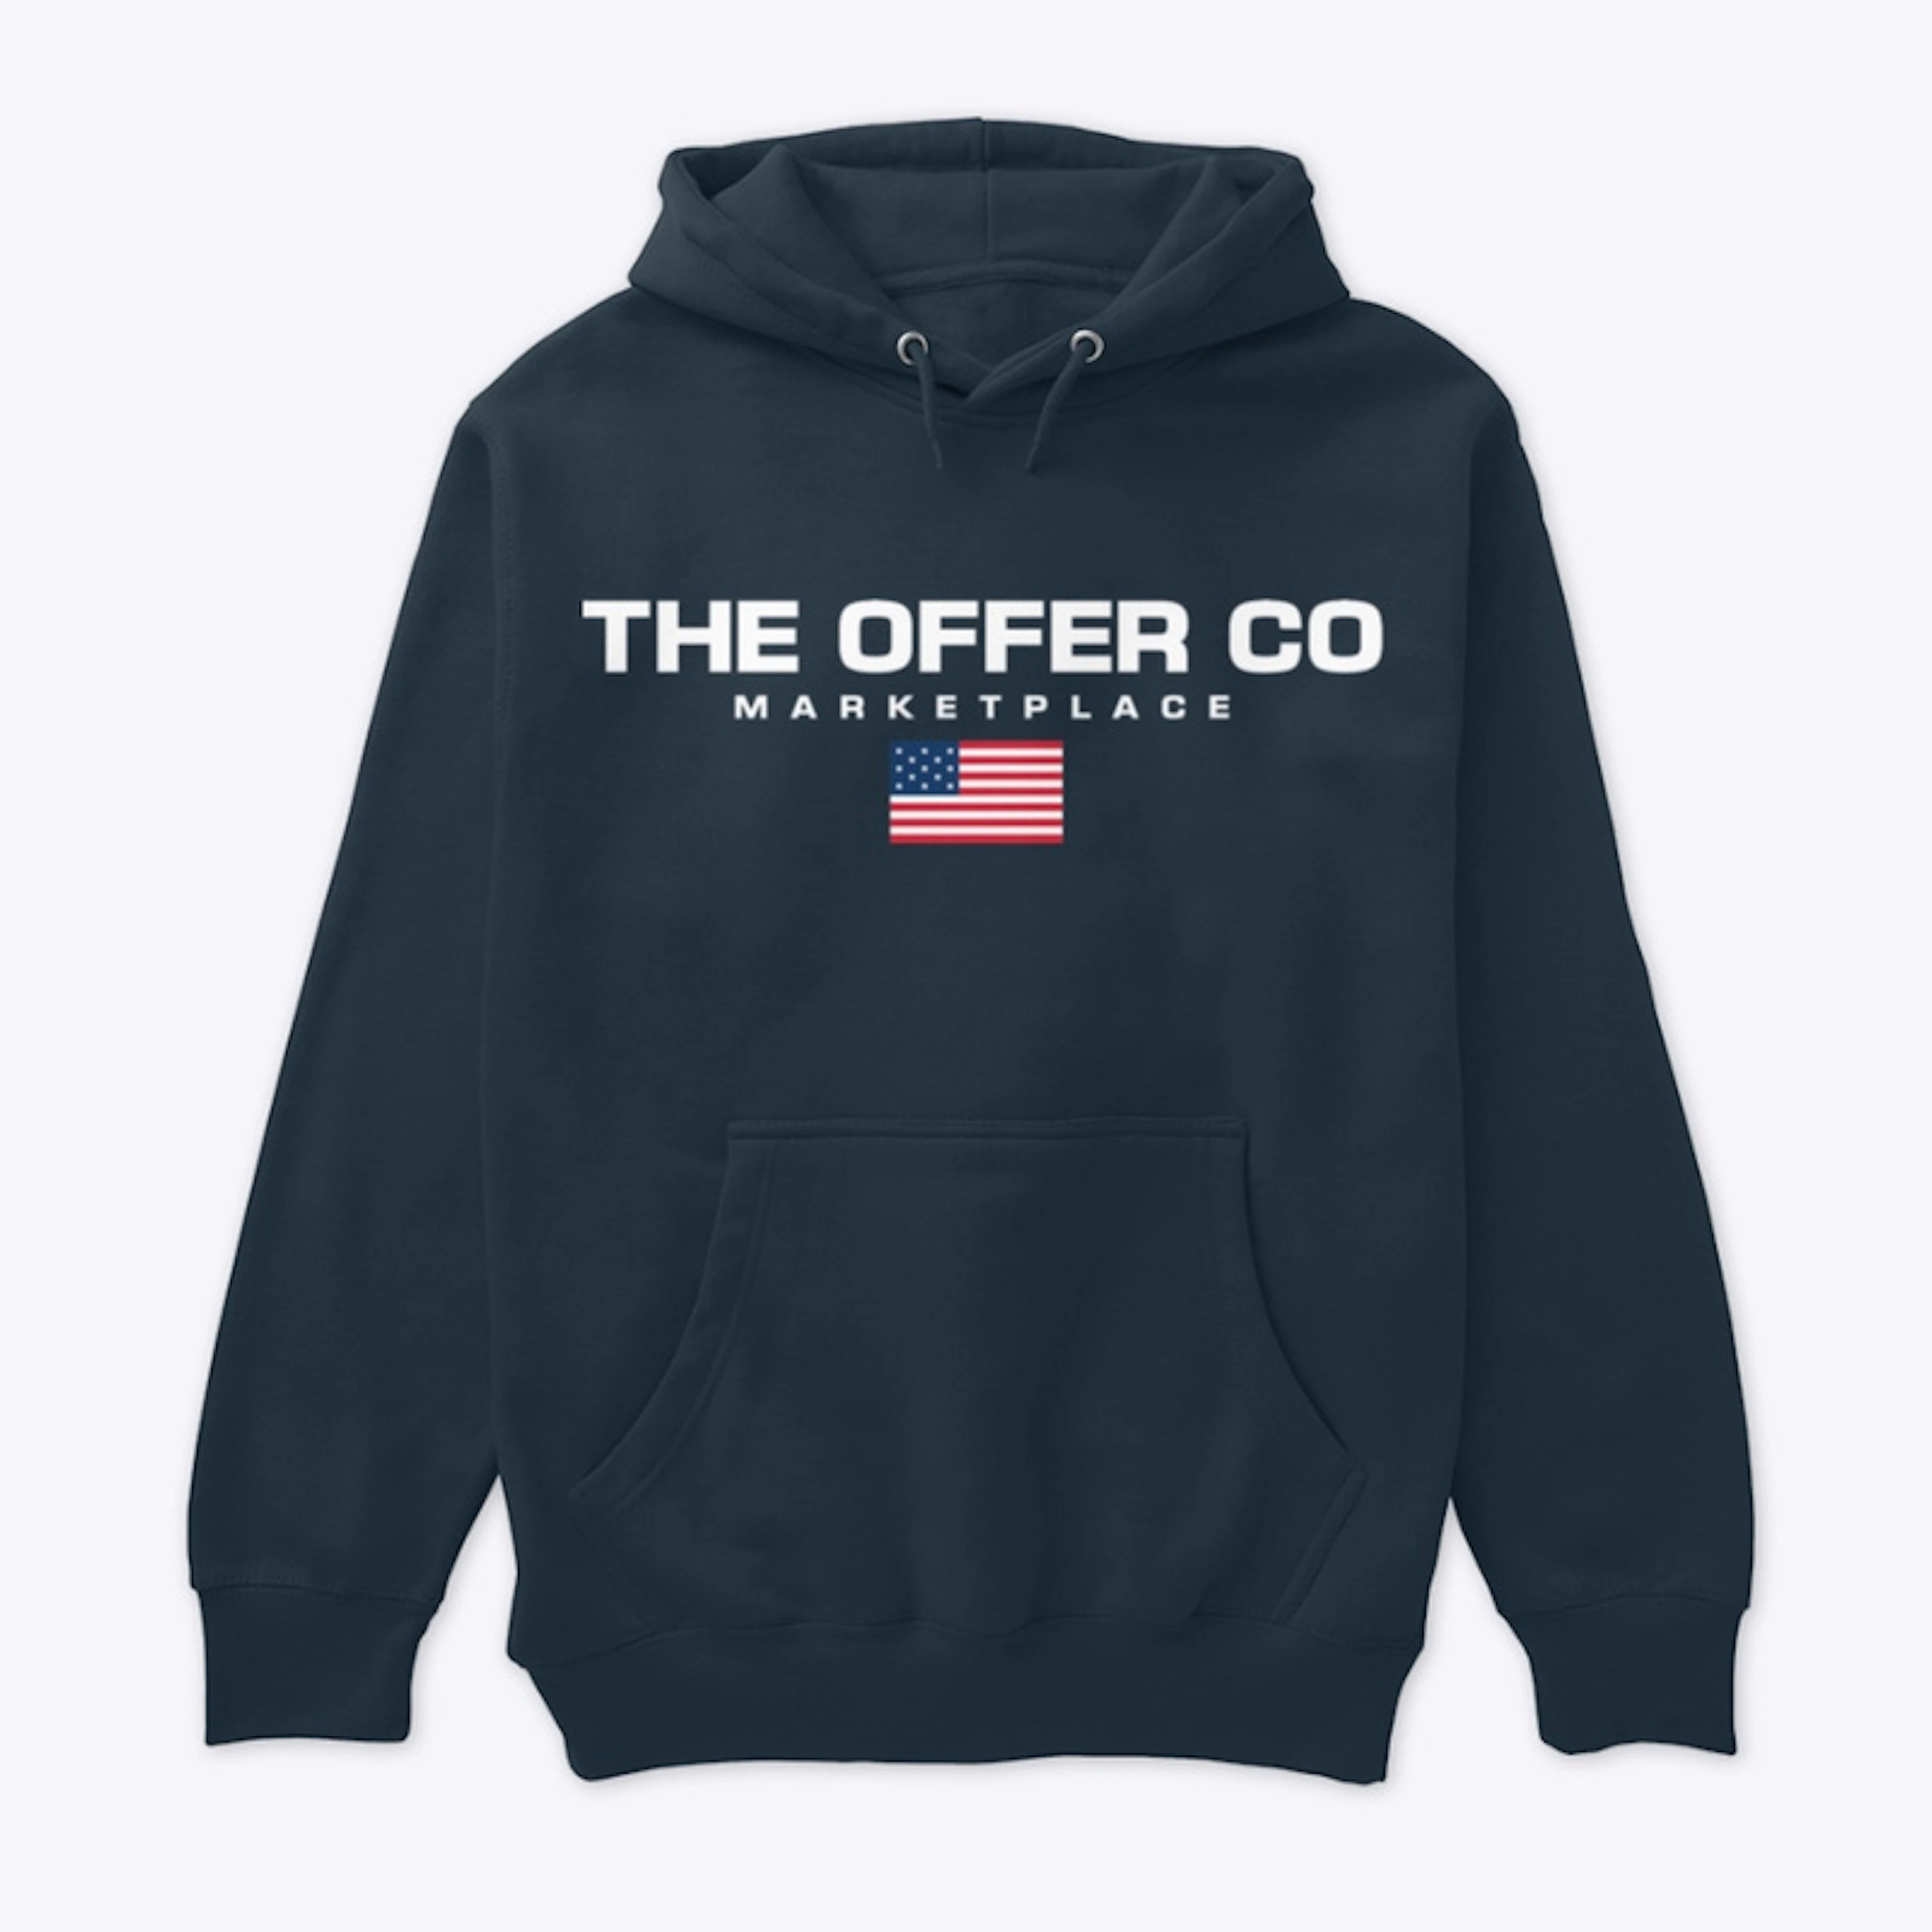 The Offer Company Marketplace Pullover